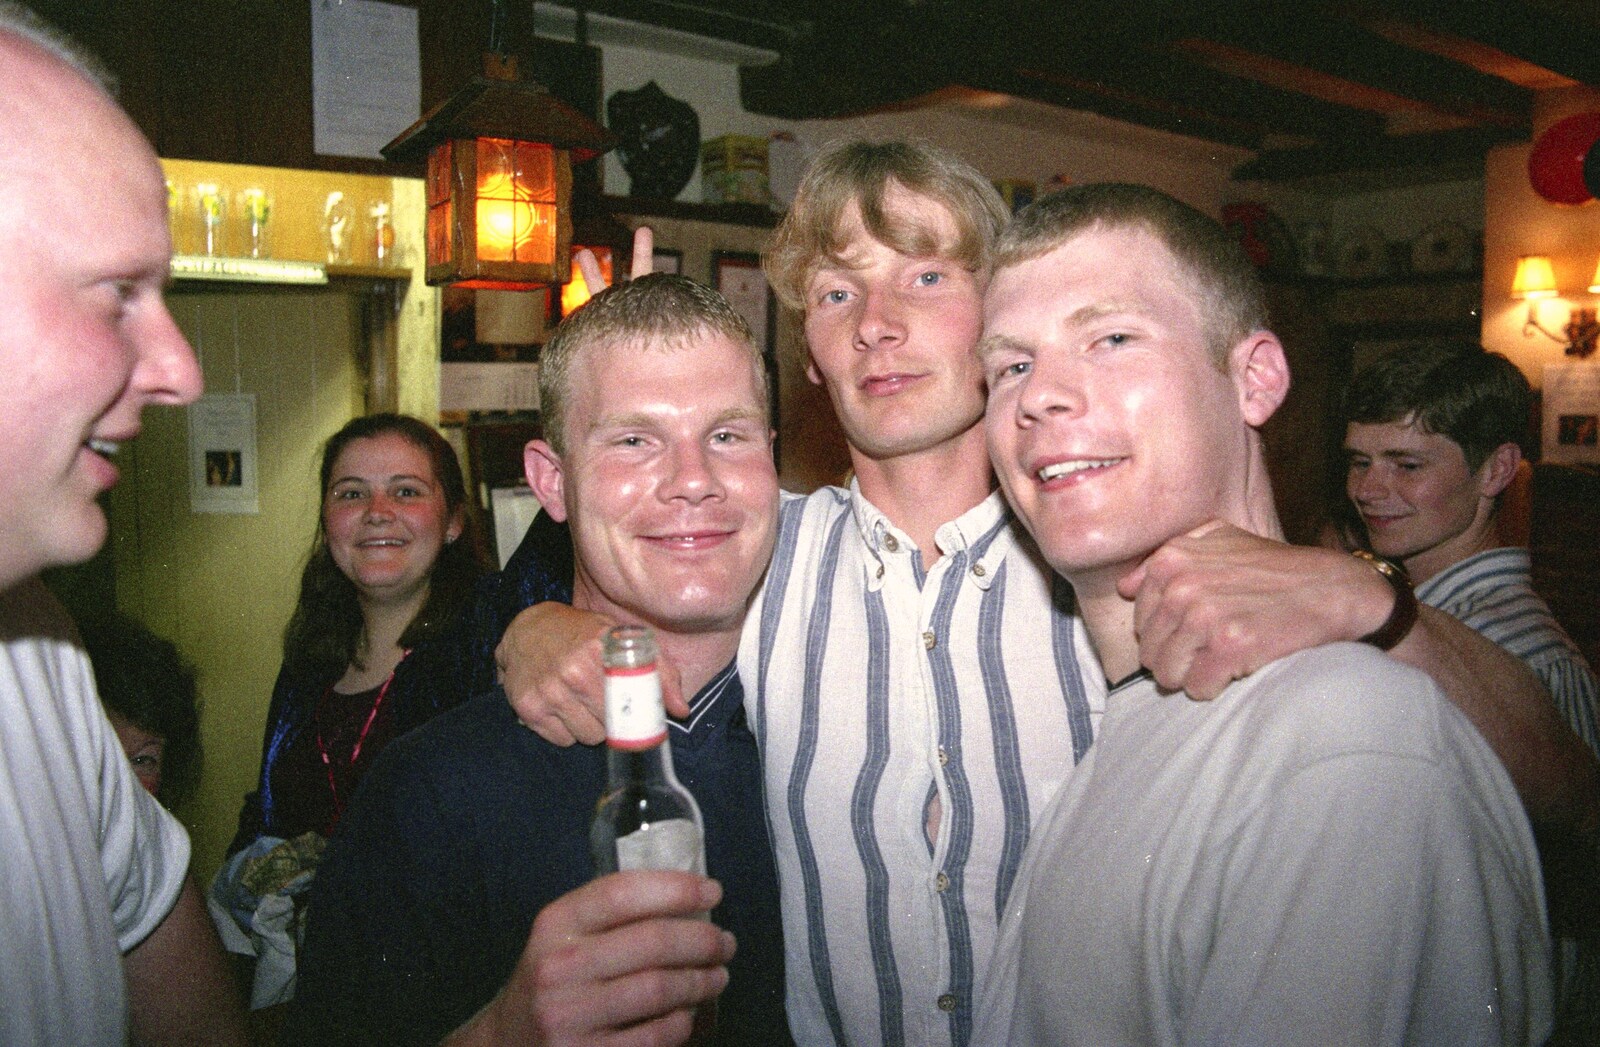 Mikey P, Jimmy and Andy from Lorraine's 21st Birthday, The Swan, Suffolk - 10th June 2000